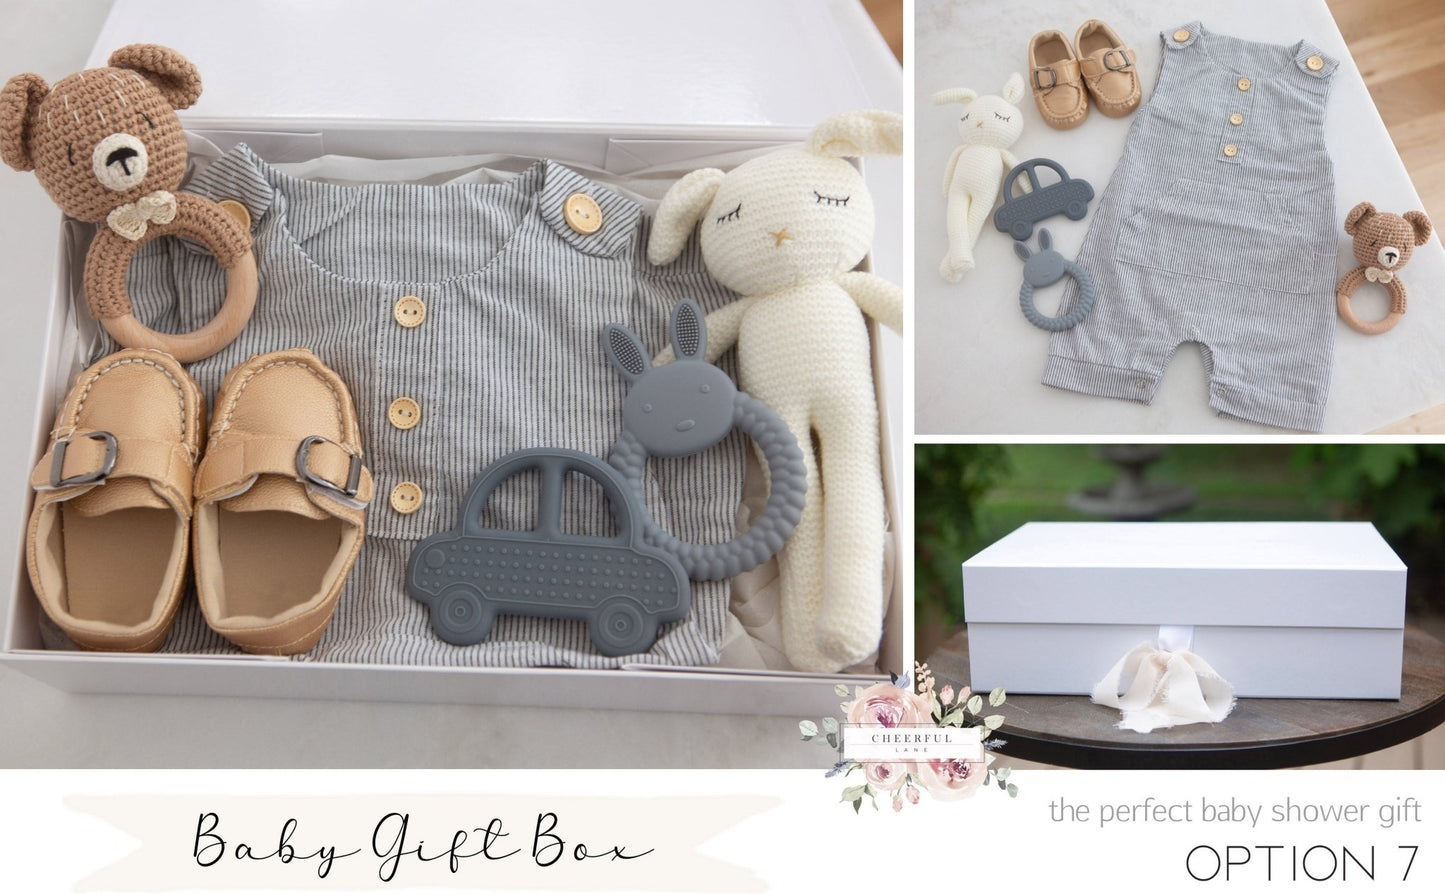 Welcome New Baby Gift Box